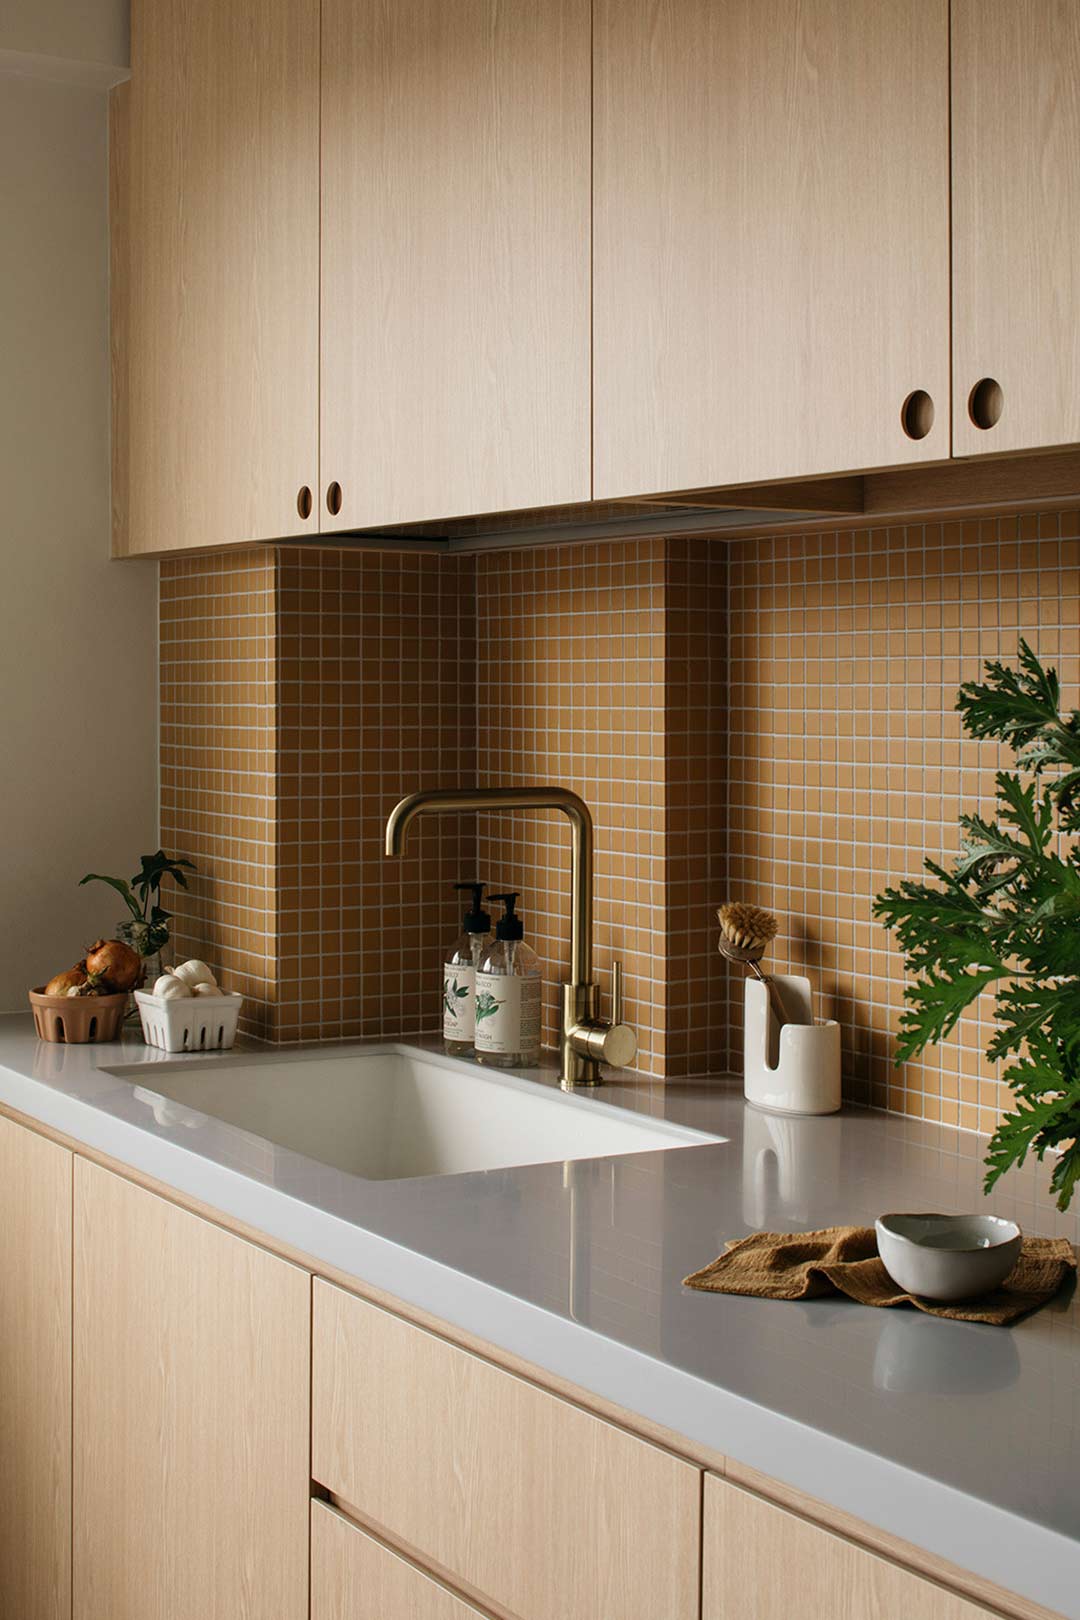 Mid century modern inspired kitchen with small mustard yellow tiles and timber cabinetry